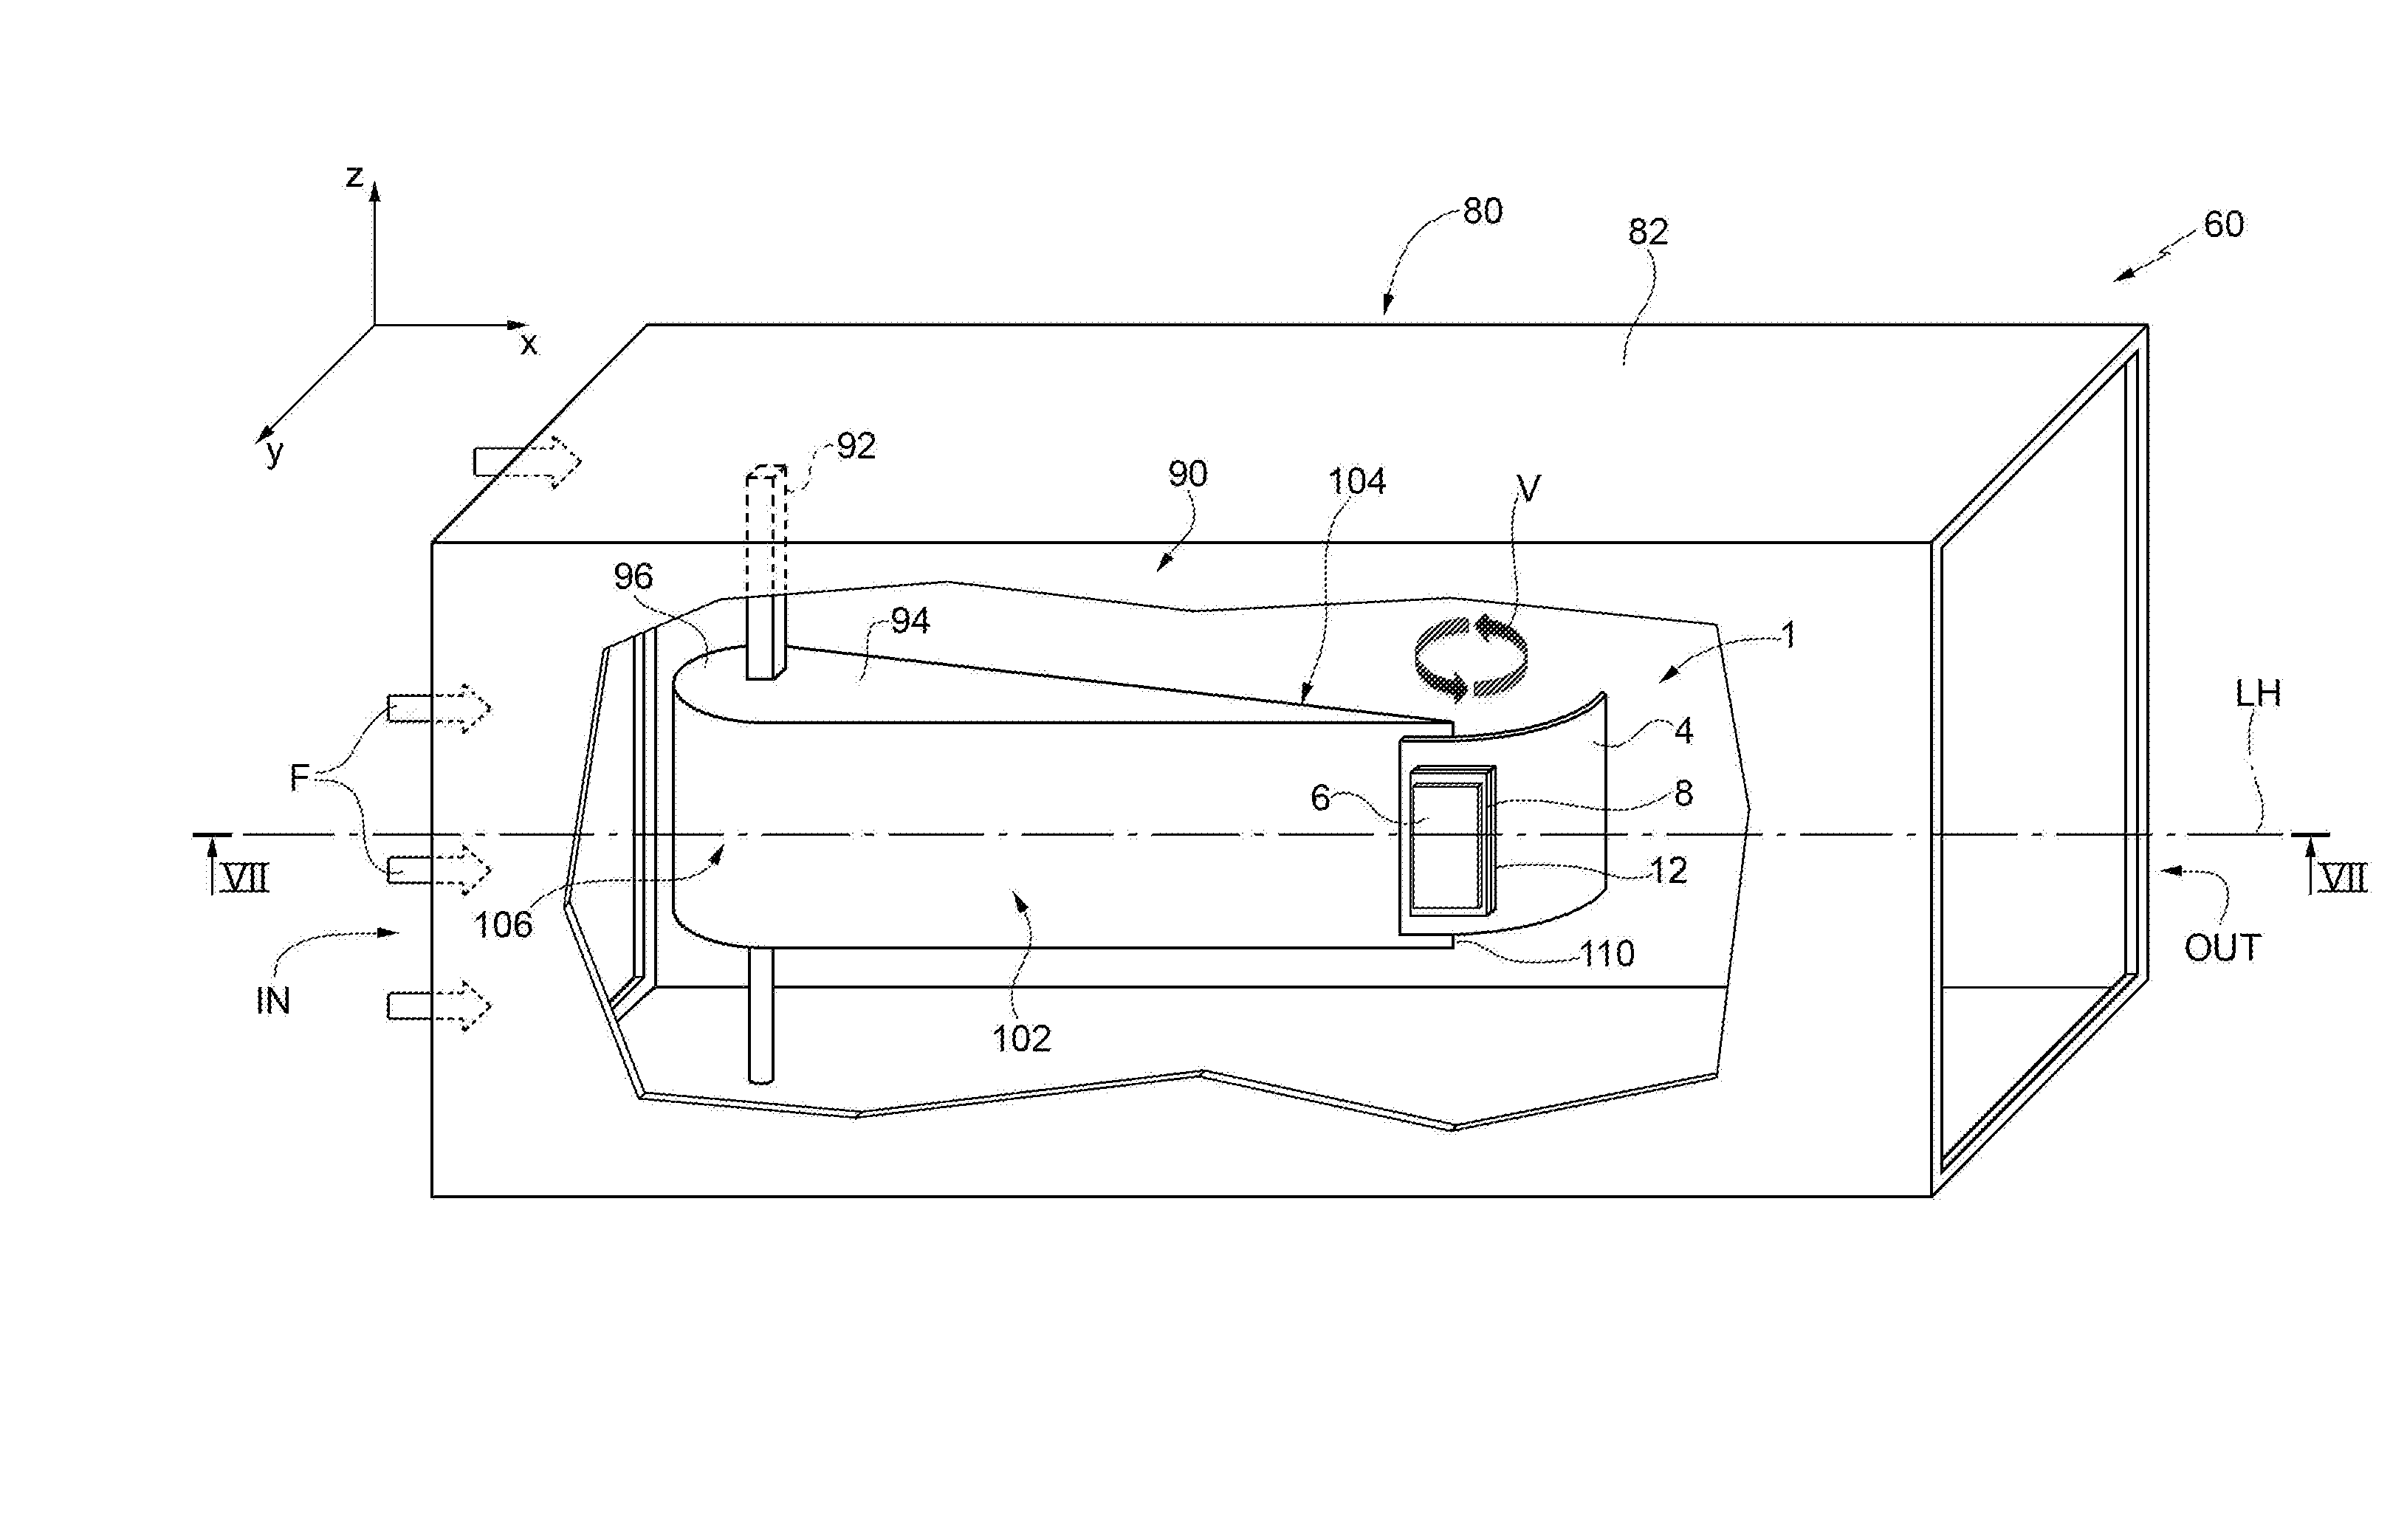 Device for harvesting energy from a fluidic flow including a thin film of piezoelectric material